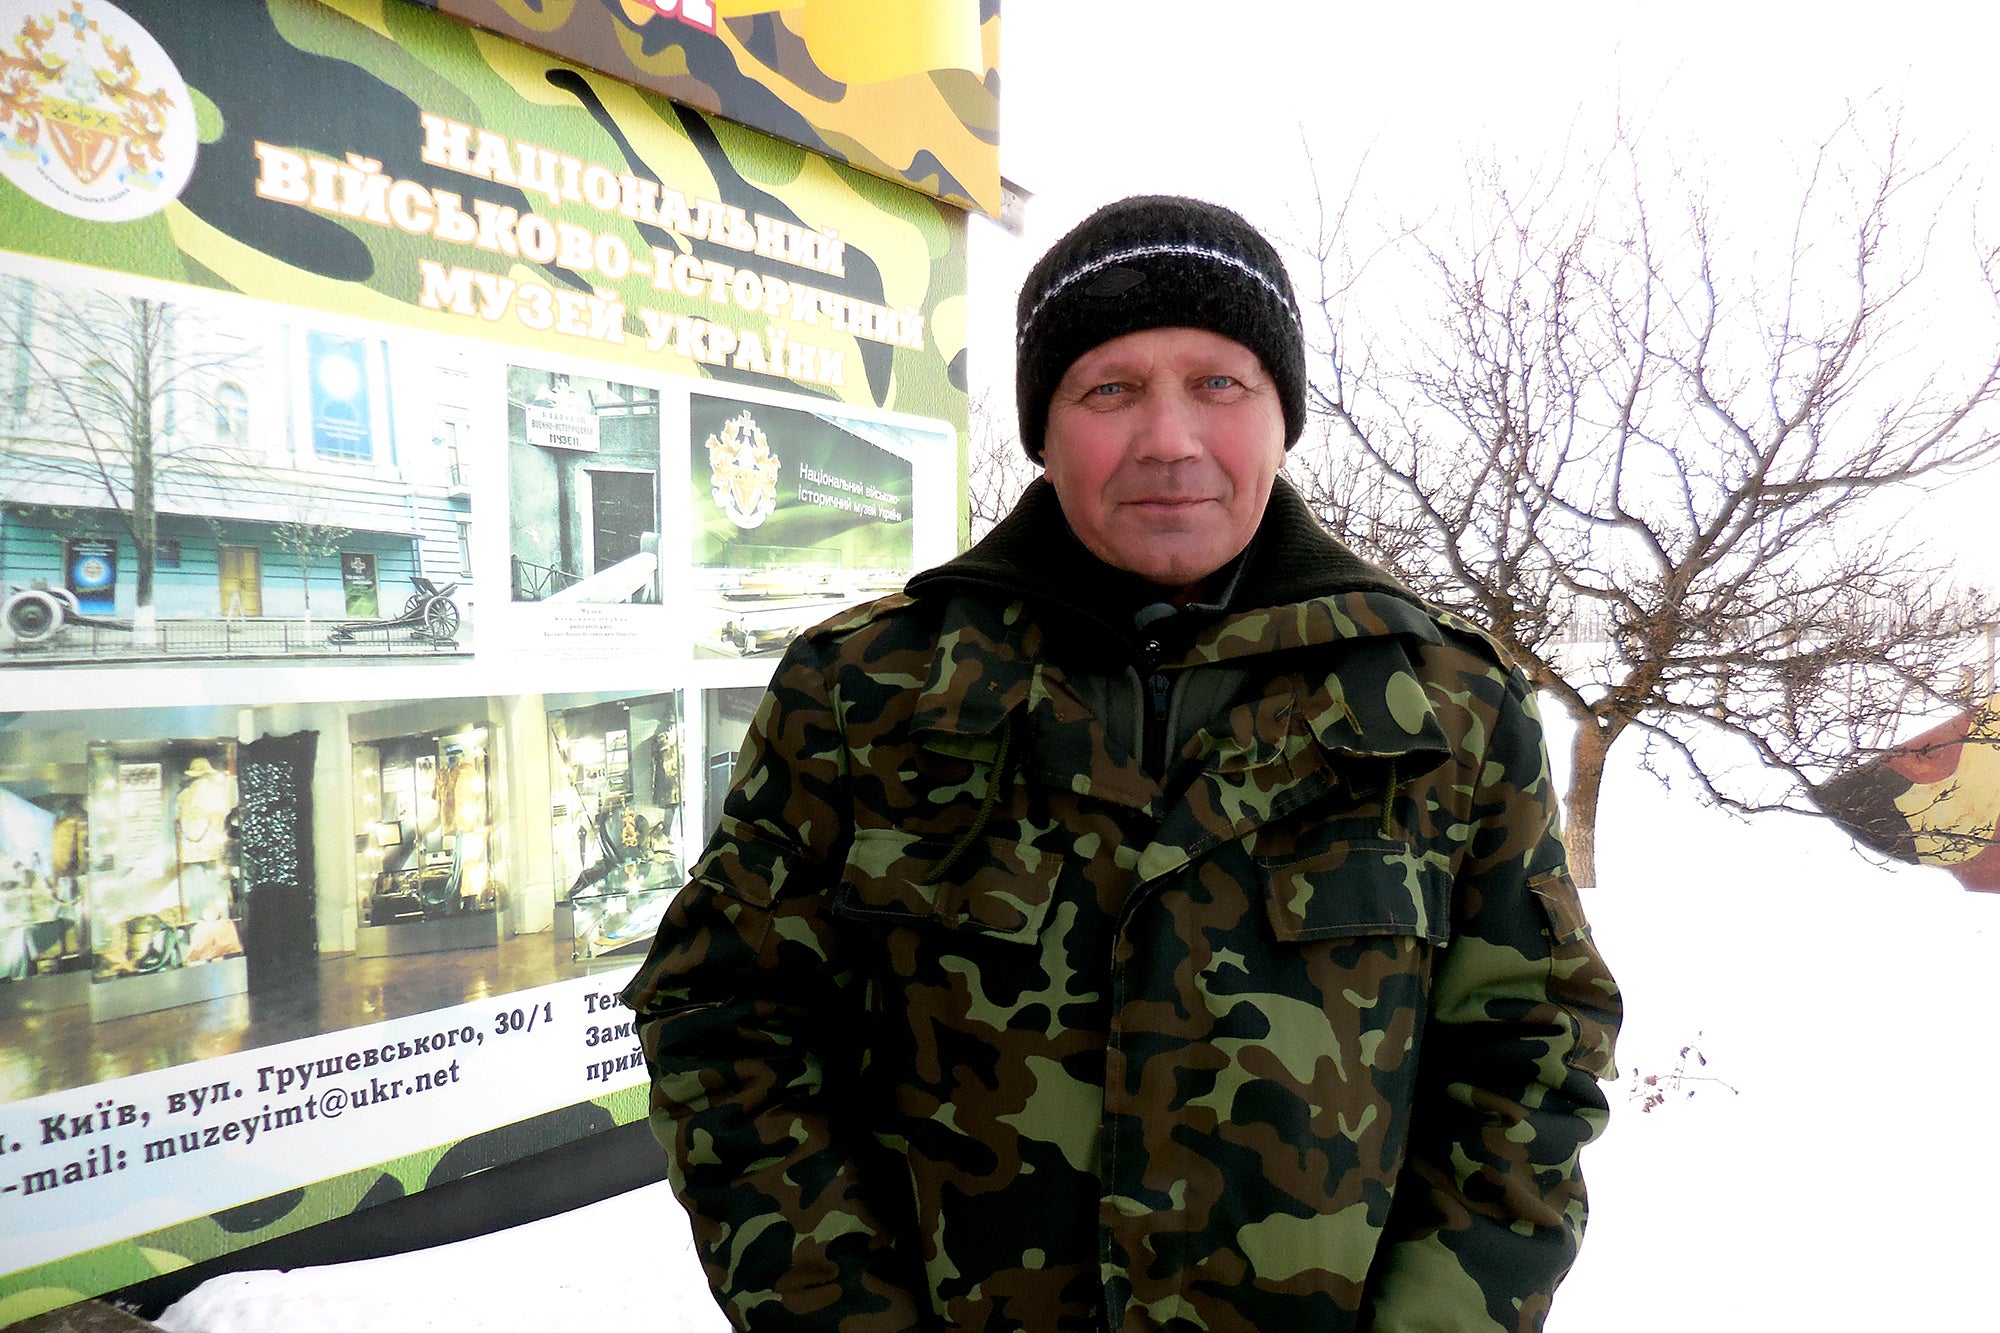 Gennadiy Fil’, once a Soviet army officer stationed at the base, is now a tour guide (Cheryl L Reed/Washington Post)